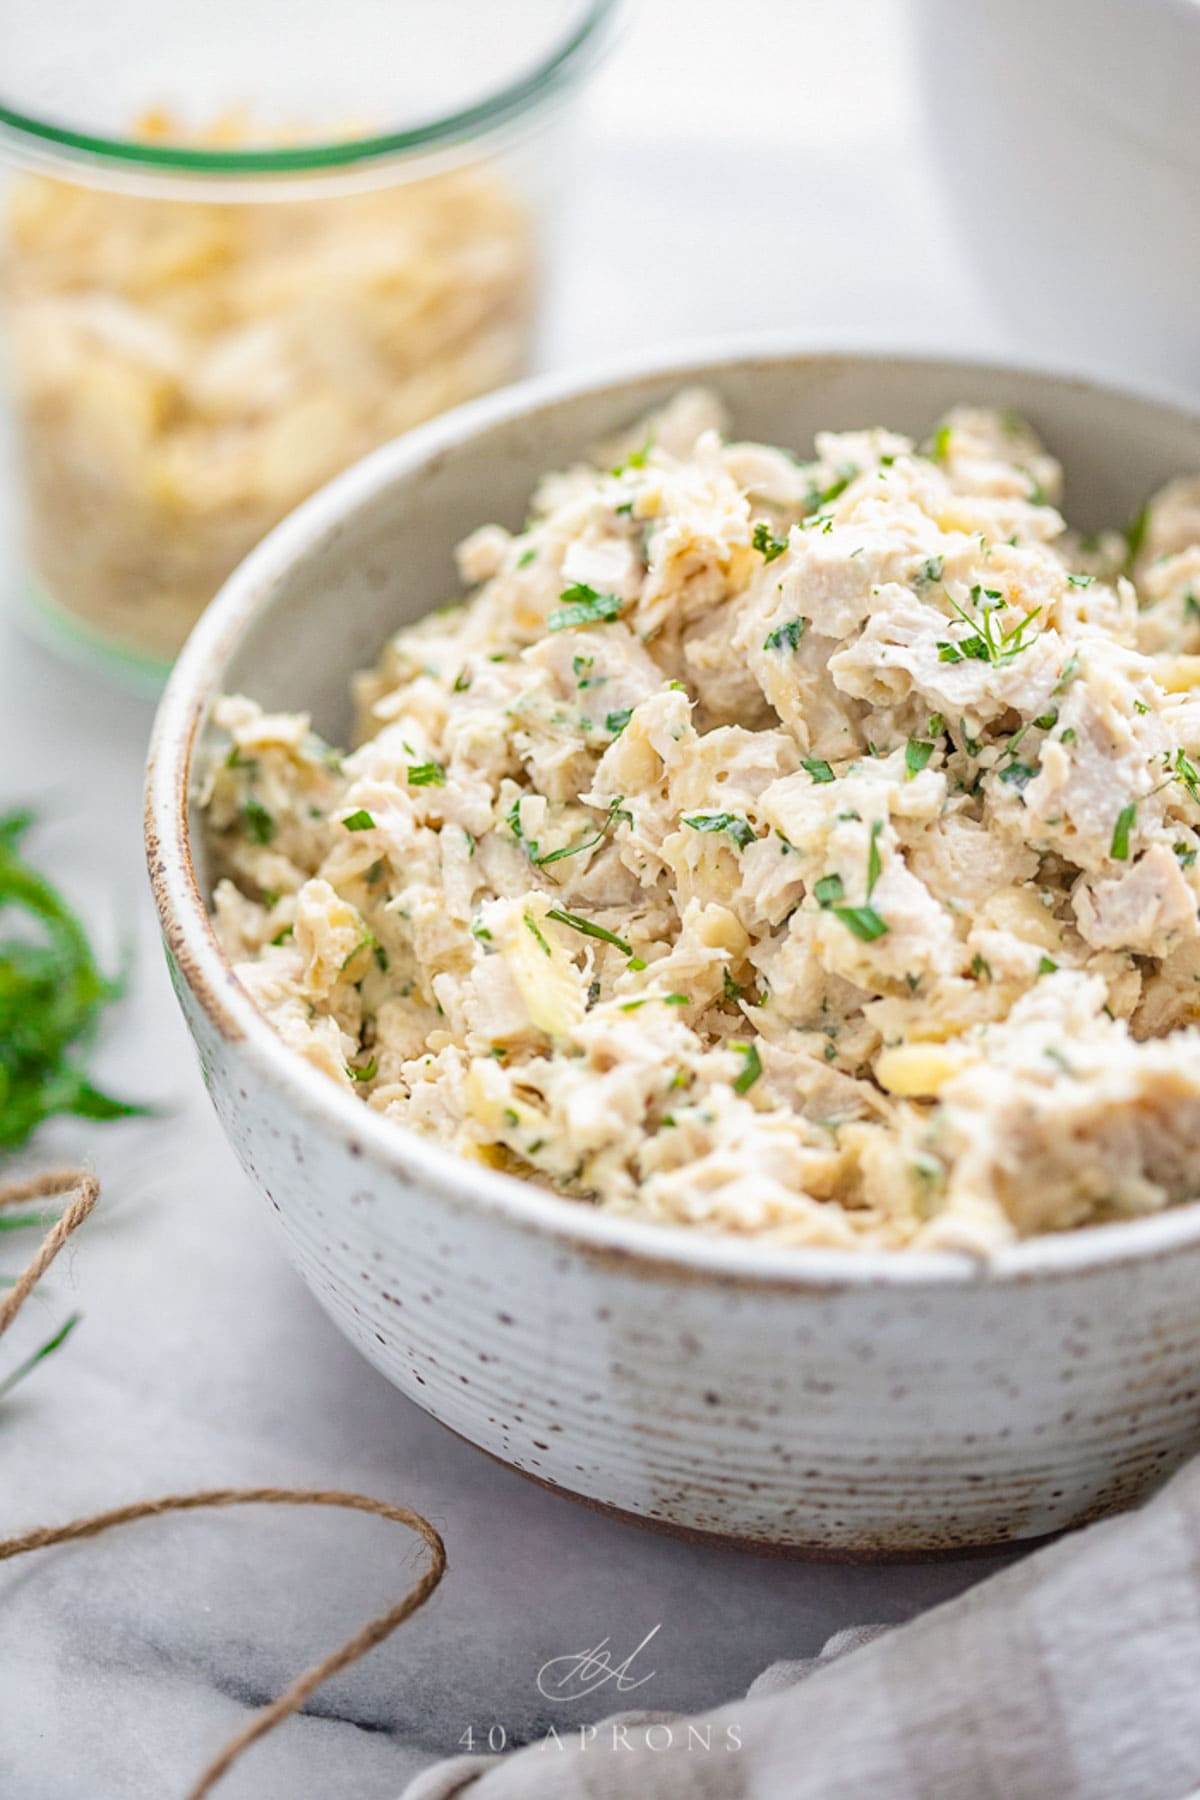 A bowl of tarragon chicken salad with slivered almonds.